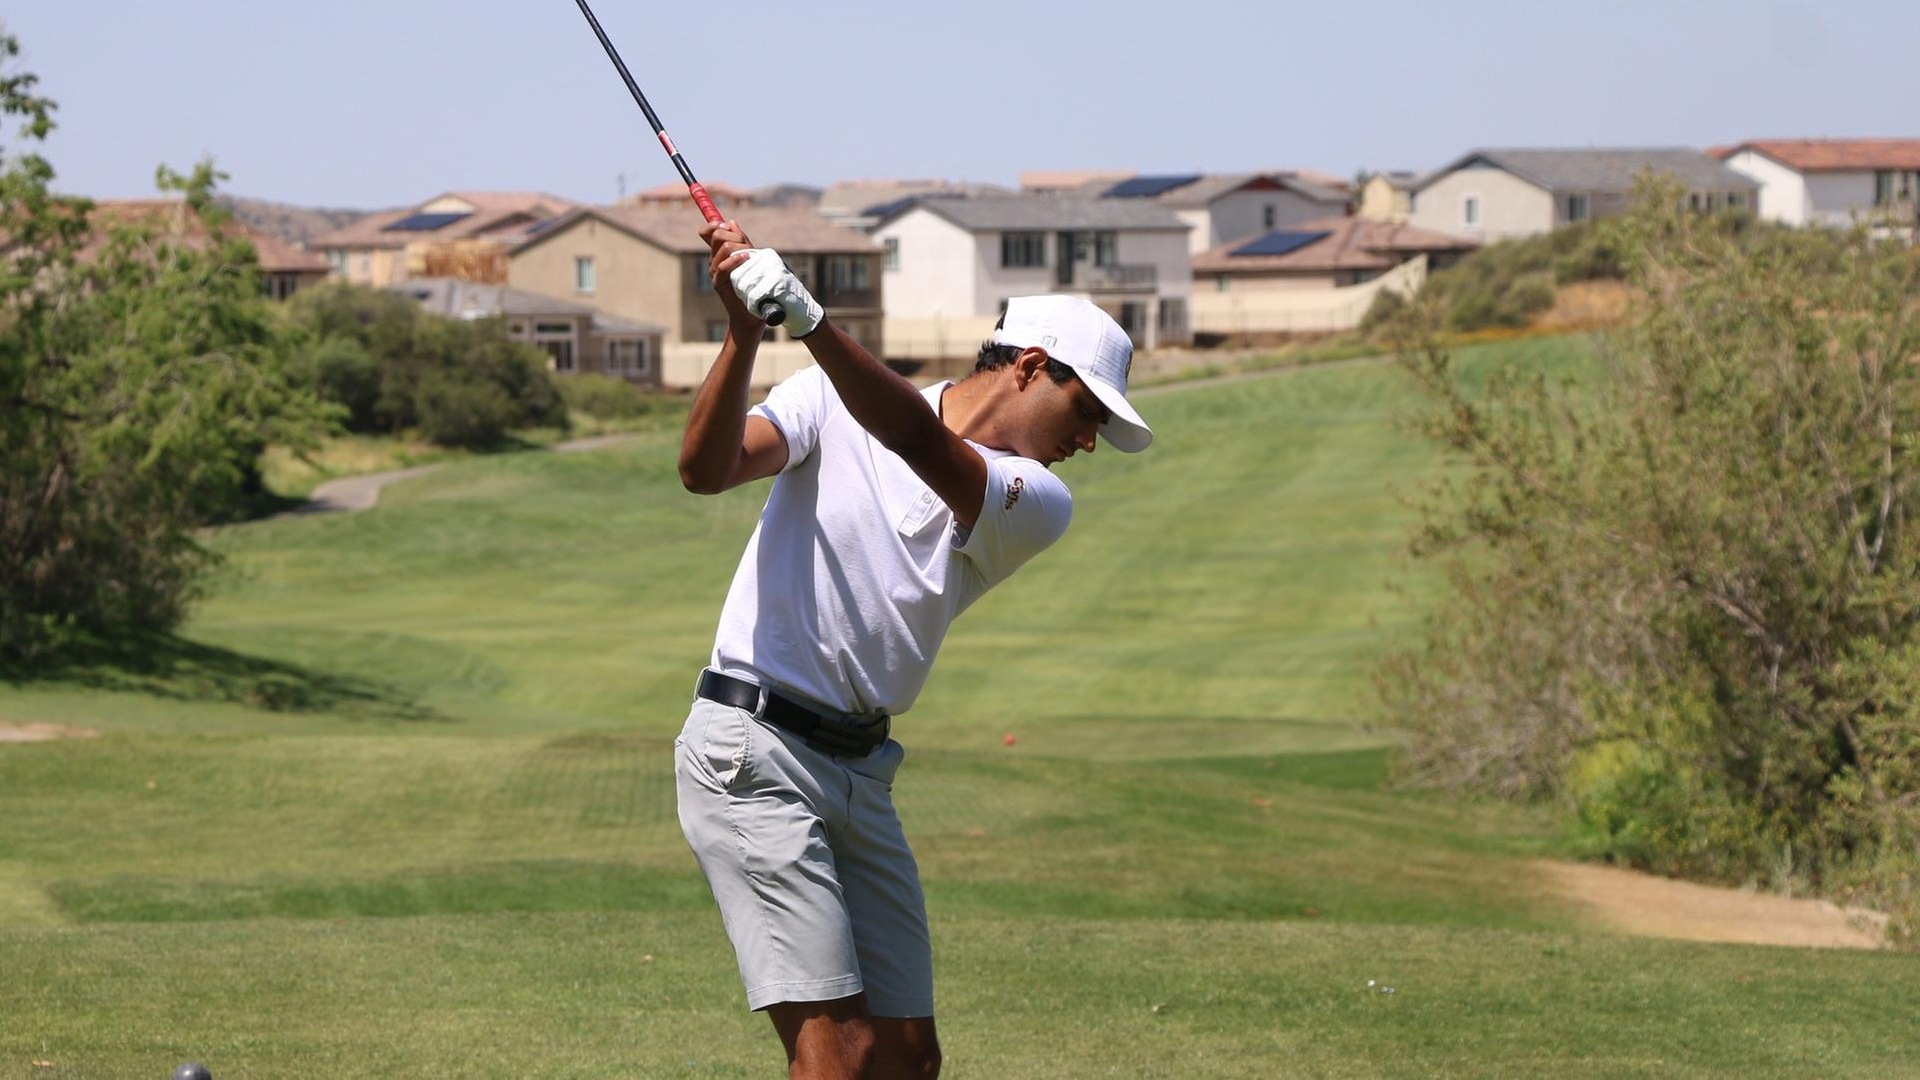 Vikram Chatterjee played all three of his rounds under par